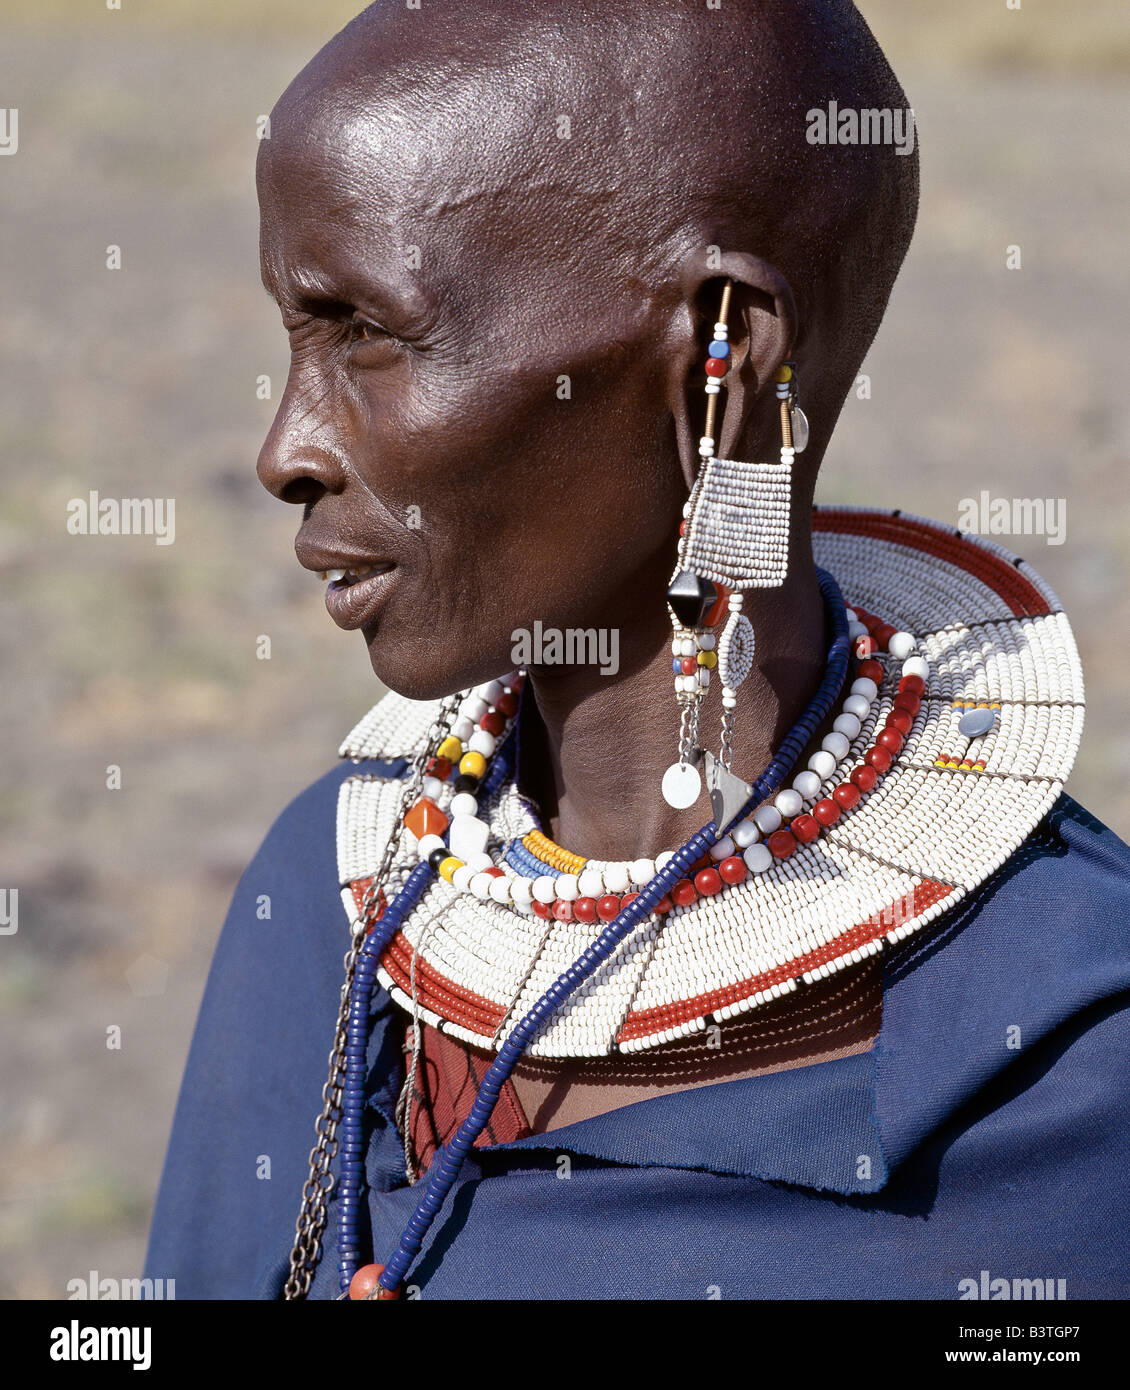 Tanzania, Northern Tanzania, Engaruka. A Maasai woman in traditional attire. The preponderance of white glass beads in her ornaments denotes that she is from the Kisongo section of the Maasai, the largest clan group, which lives on both sides of the Kenya-Tanzania border. Stock Photo